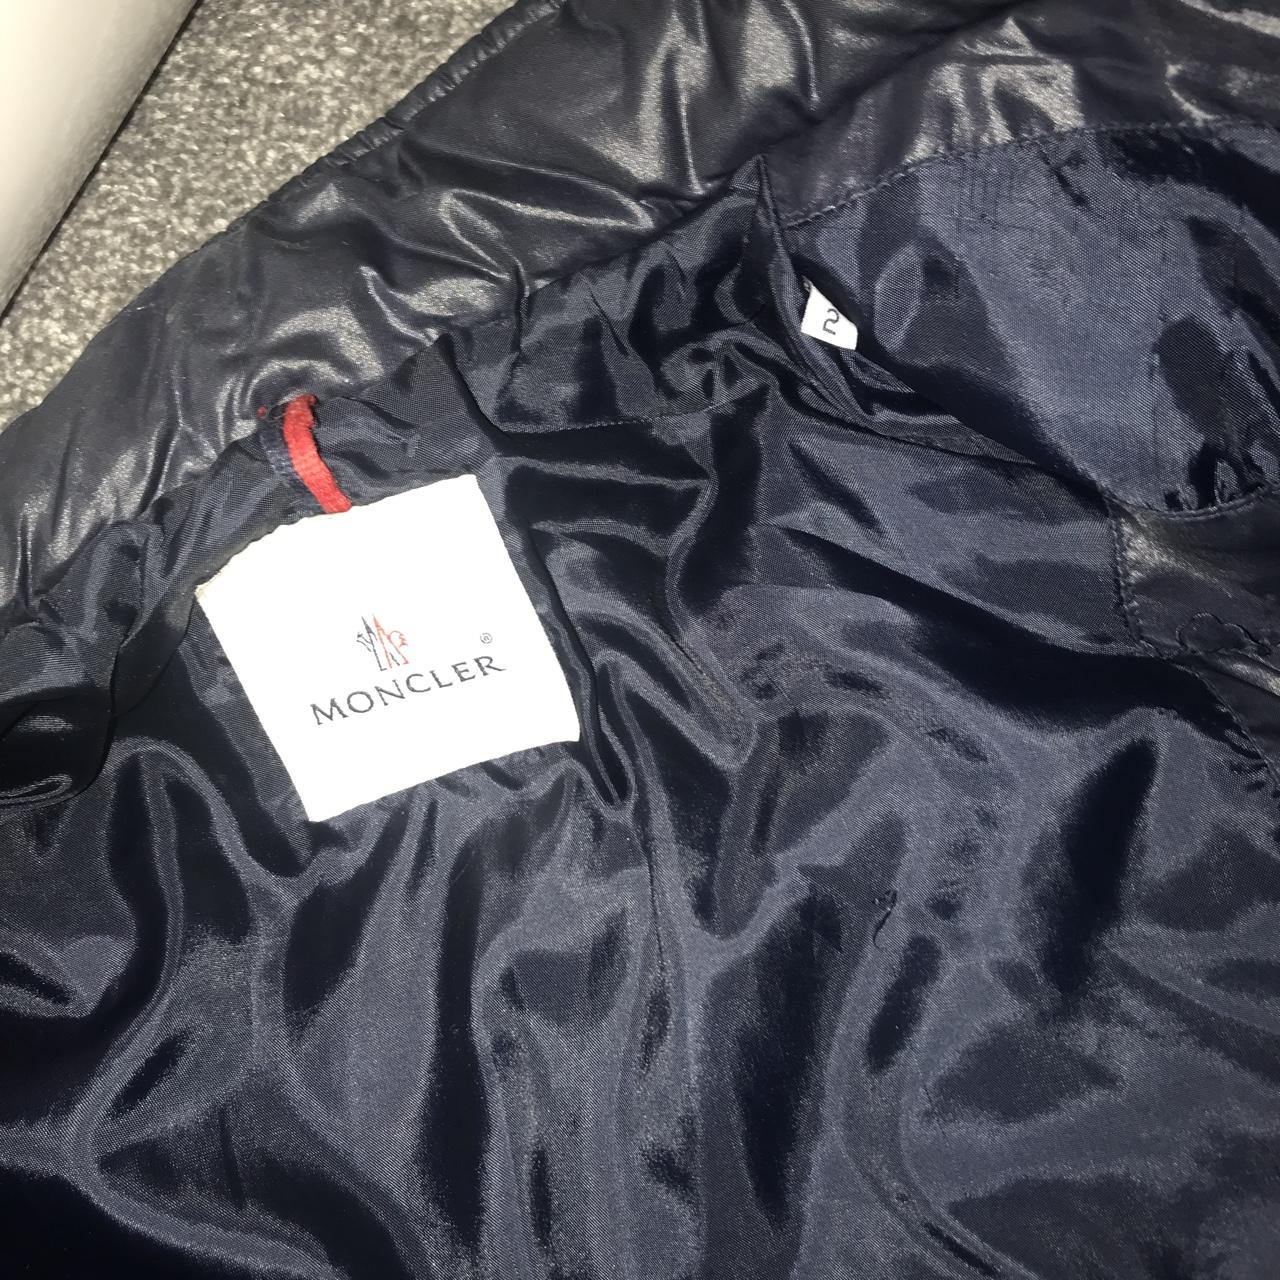 Moncler Body Warmer for sale Size 2 Good condition... - Depop